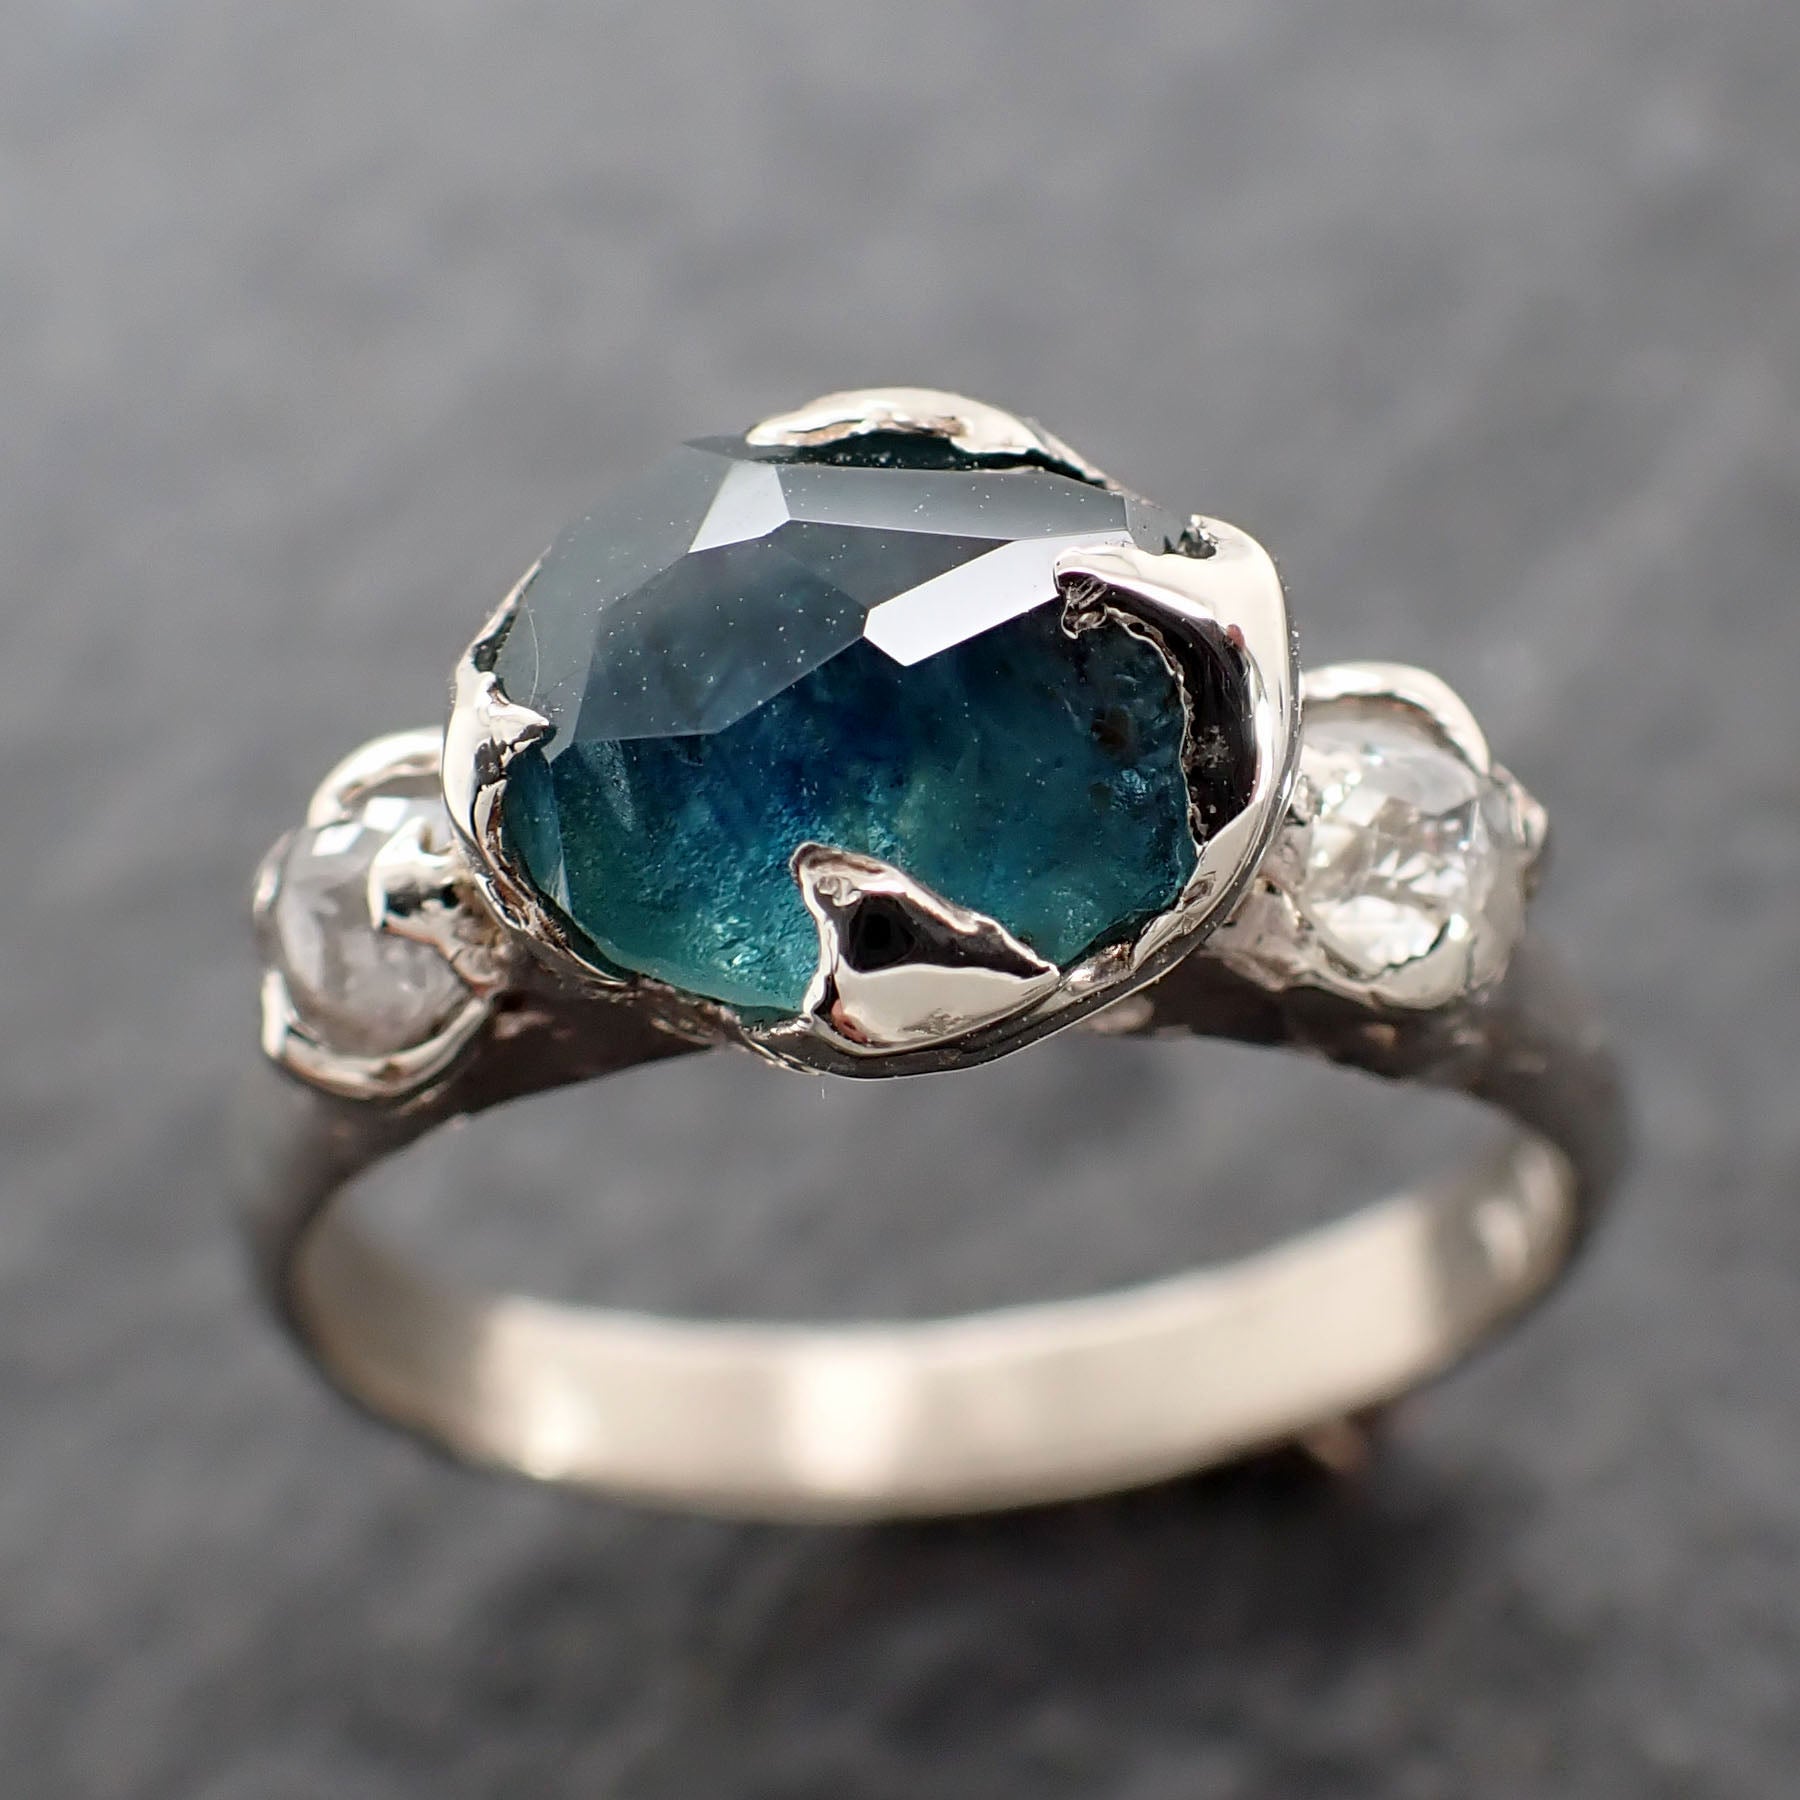 Partially faceted blue Montana Sapphire and fancy Diamonds 14k White Gold Engagement Wedding Ring Custom Gemstone Ring Multi stone Ring 2626